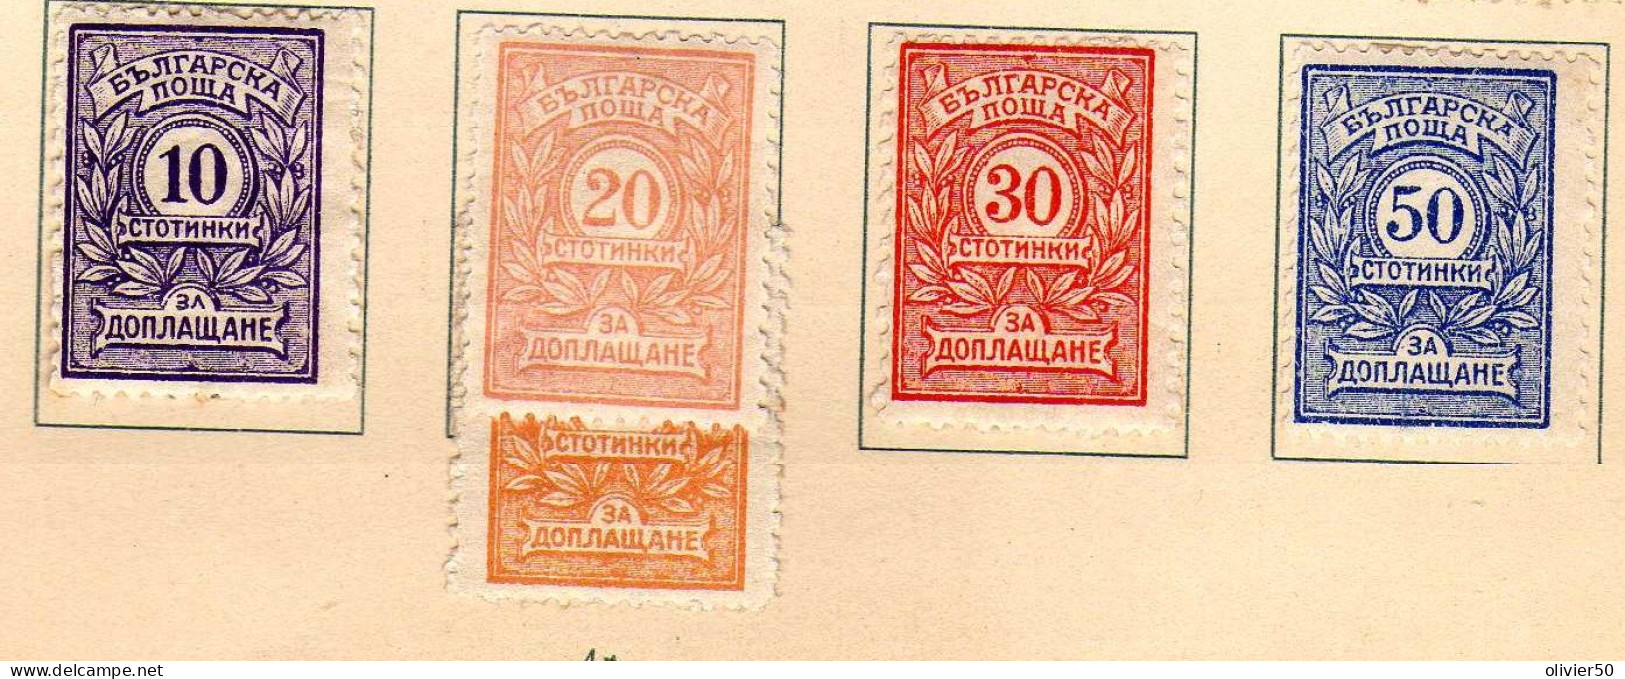 Bulgarie - 1915 - Timbres-Taxe - Neufs* - 7 Val. - Strafport